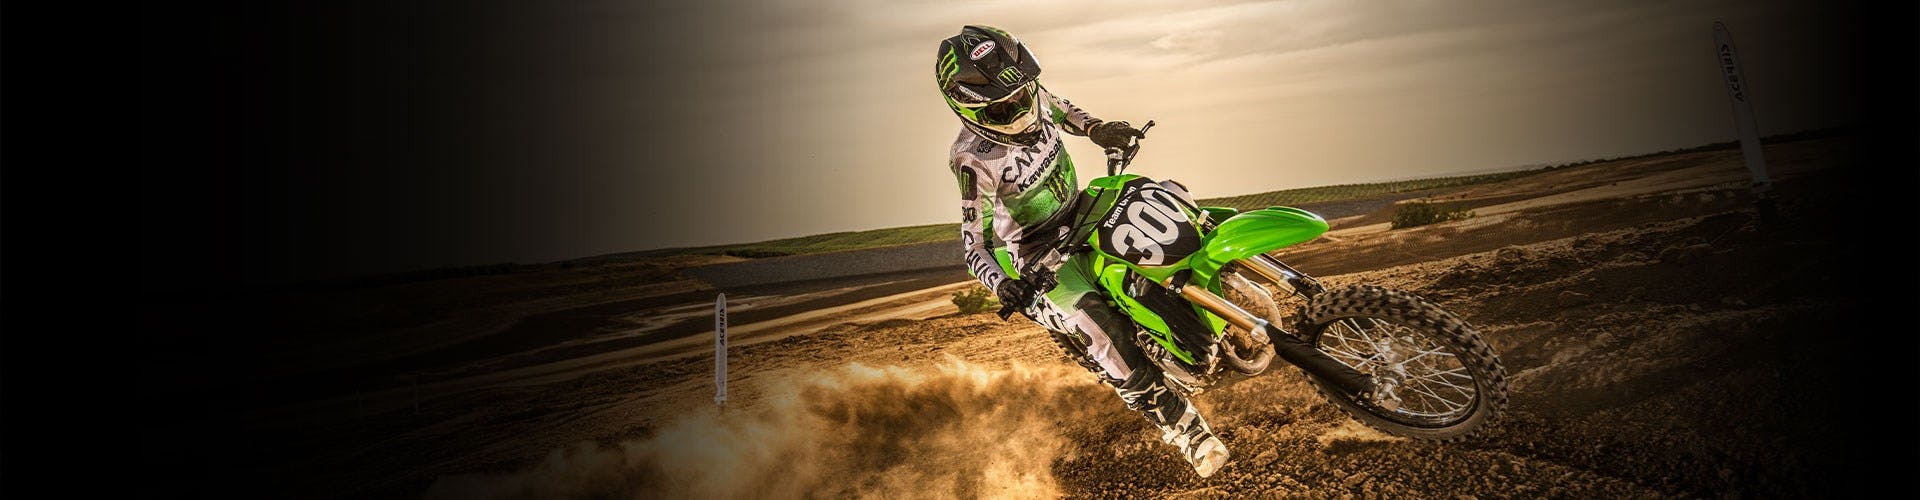 KAWASAKI KX85 in action on off-road track